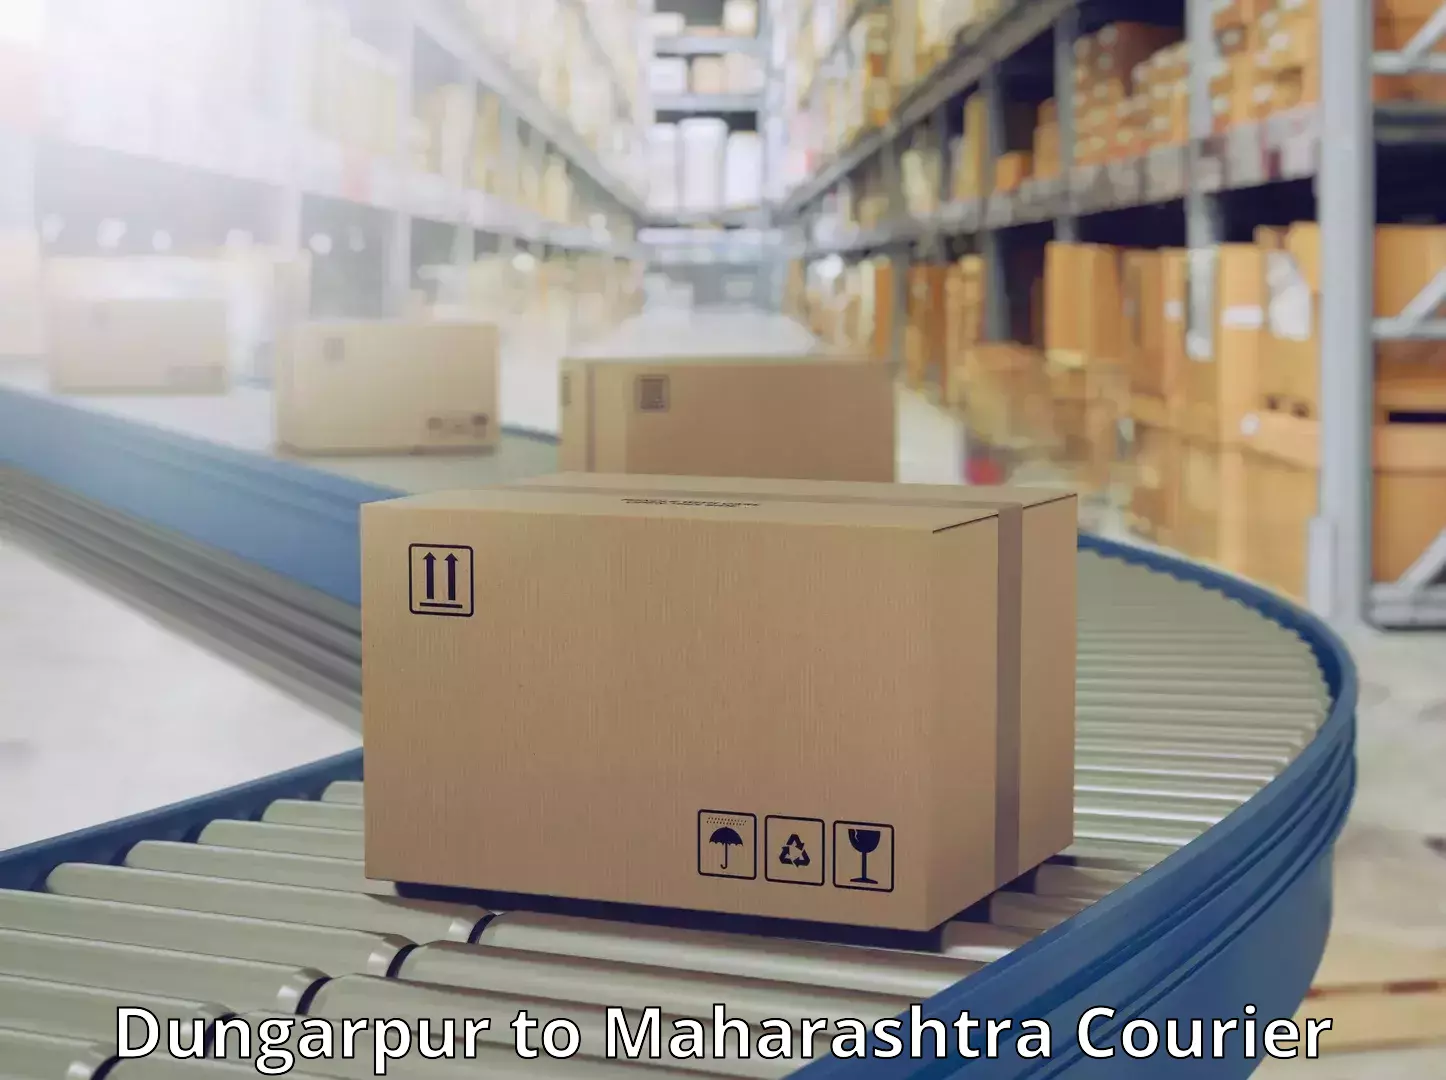 Smart parcel delivery in Dungarpur to Pune